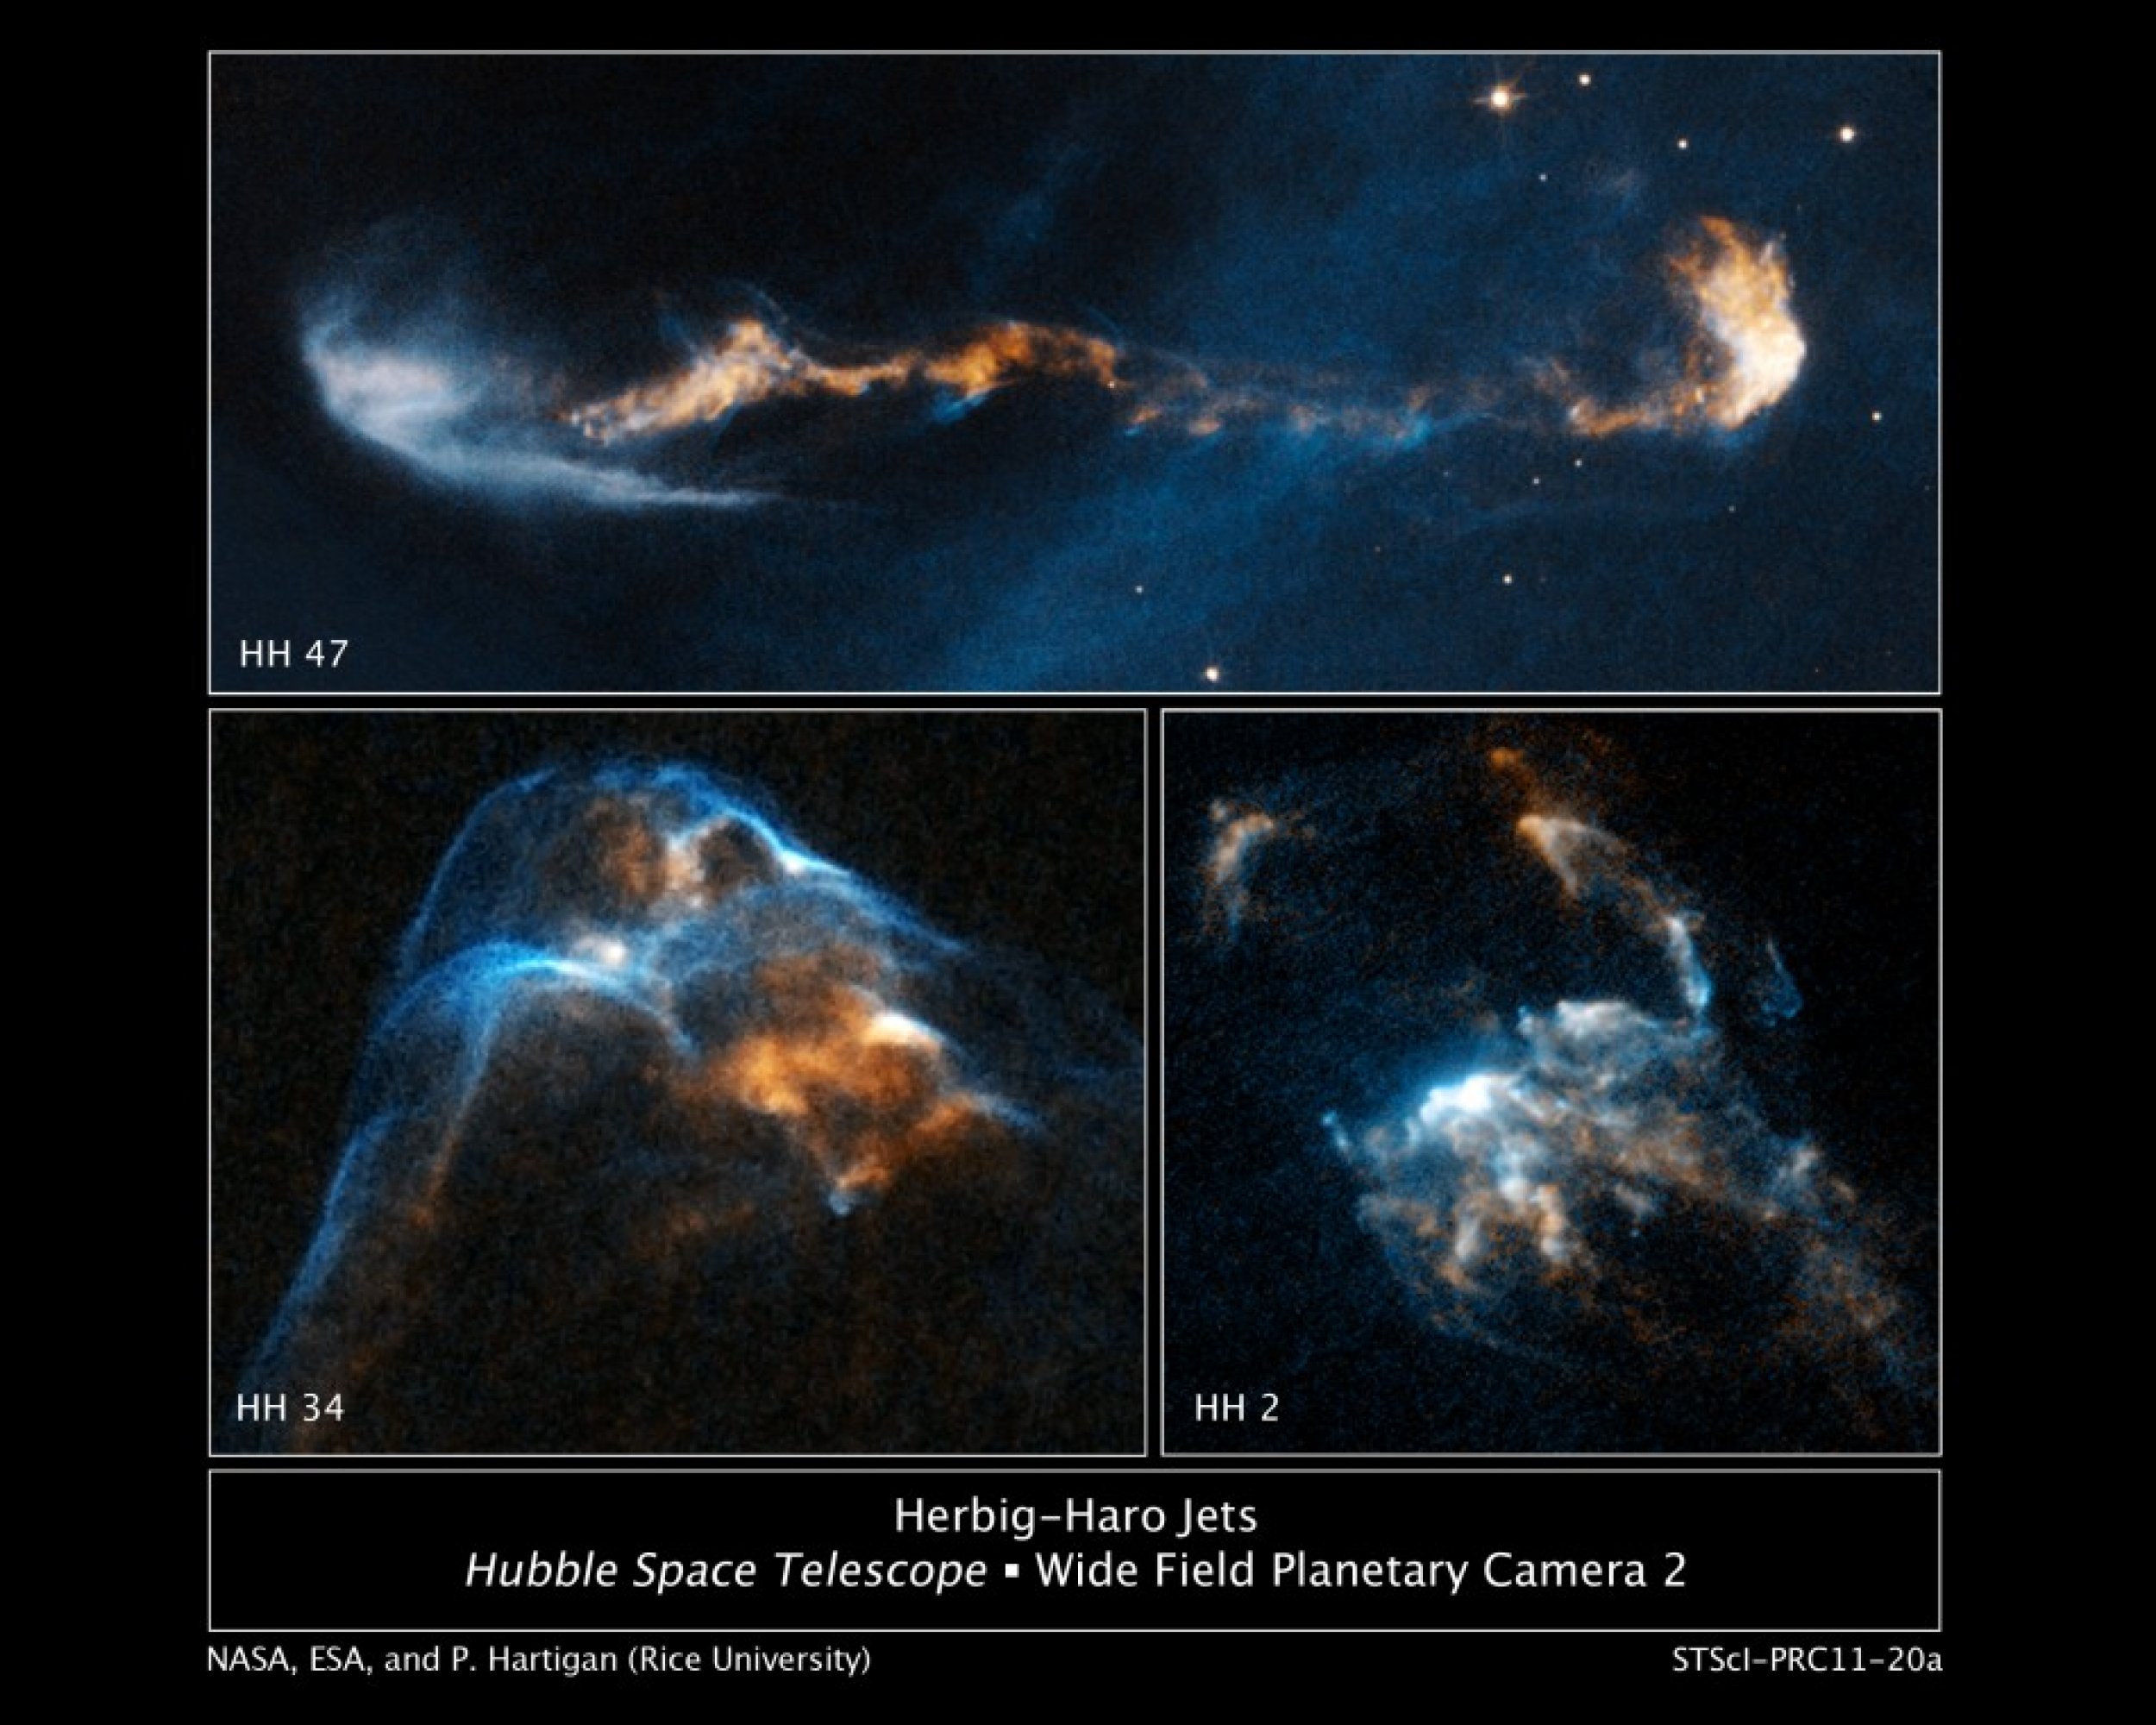 New Cosmic Images from Hubble Telescope Offers a Peek at Suns Birth